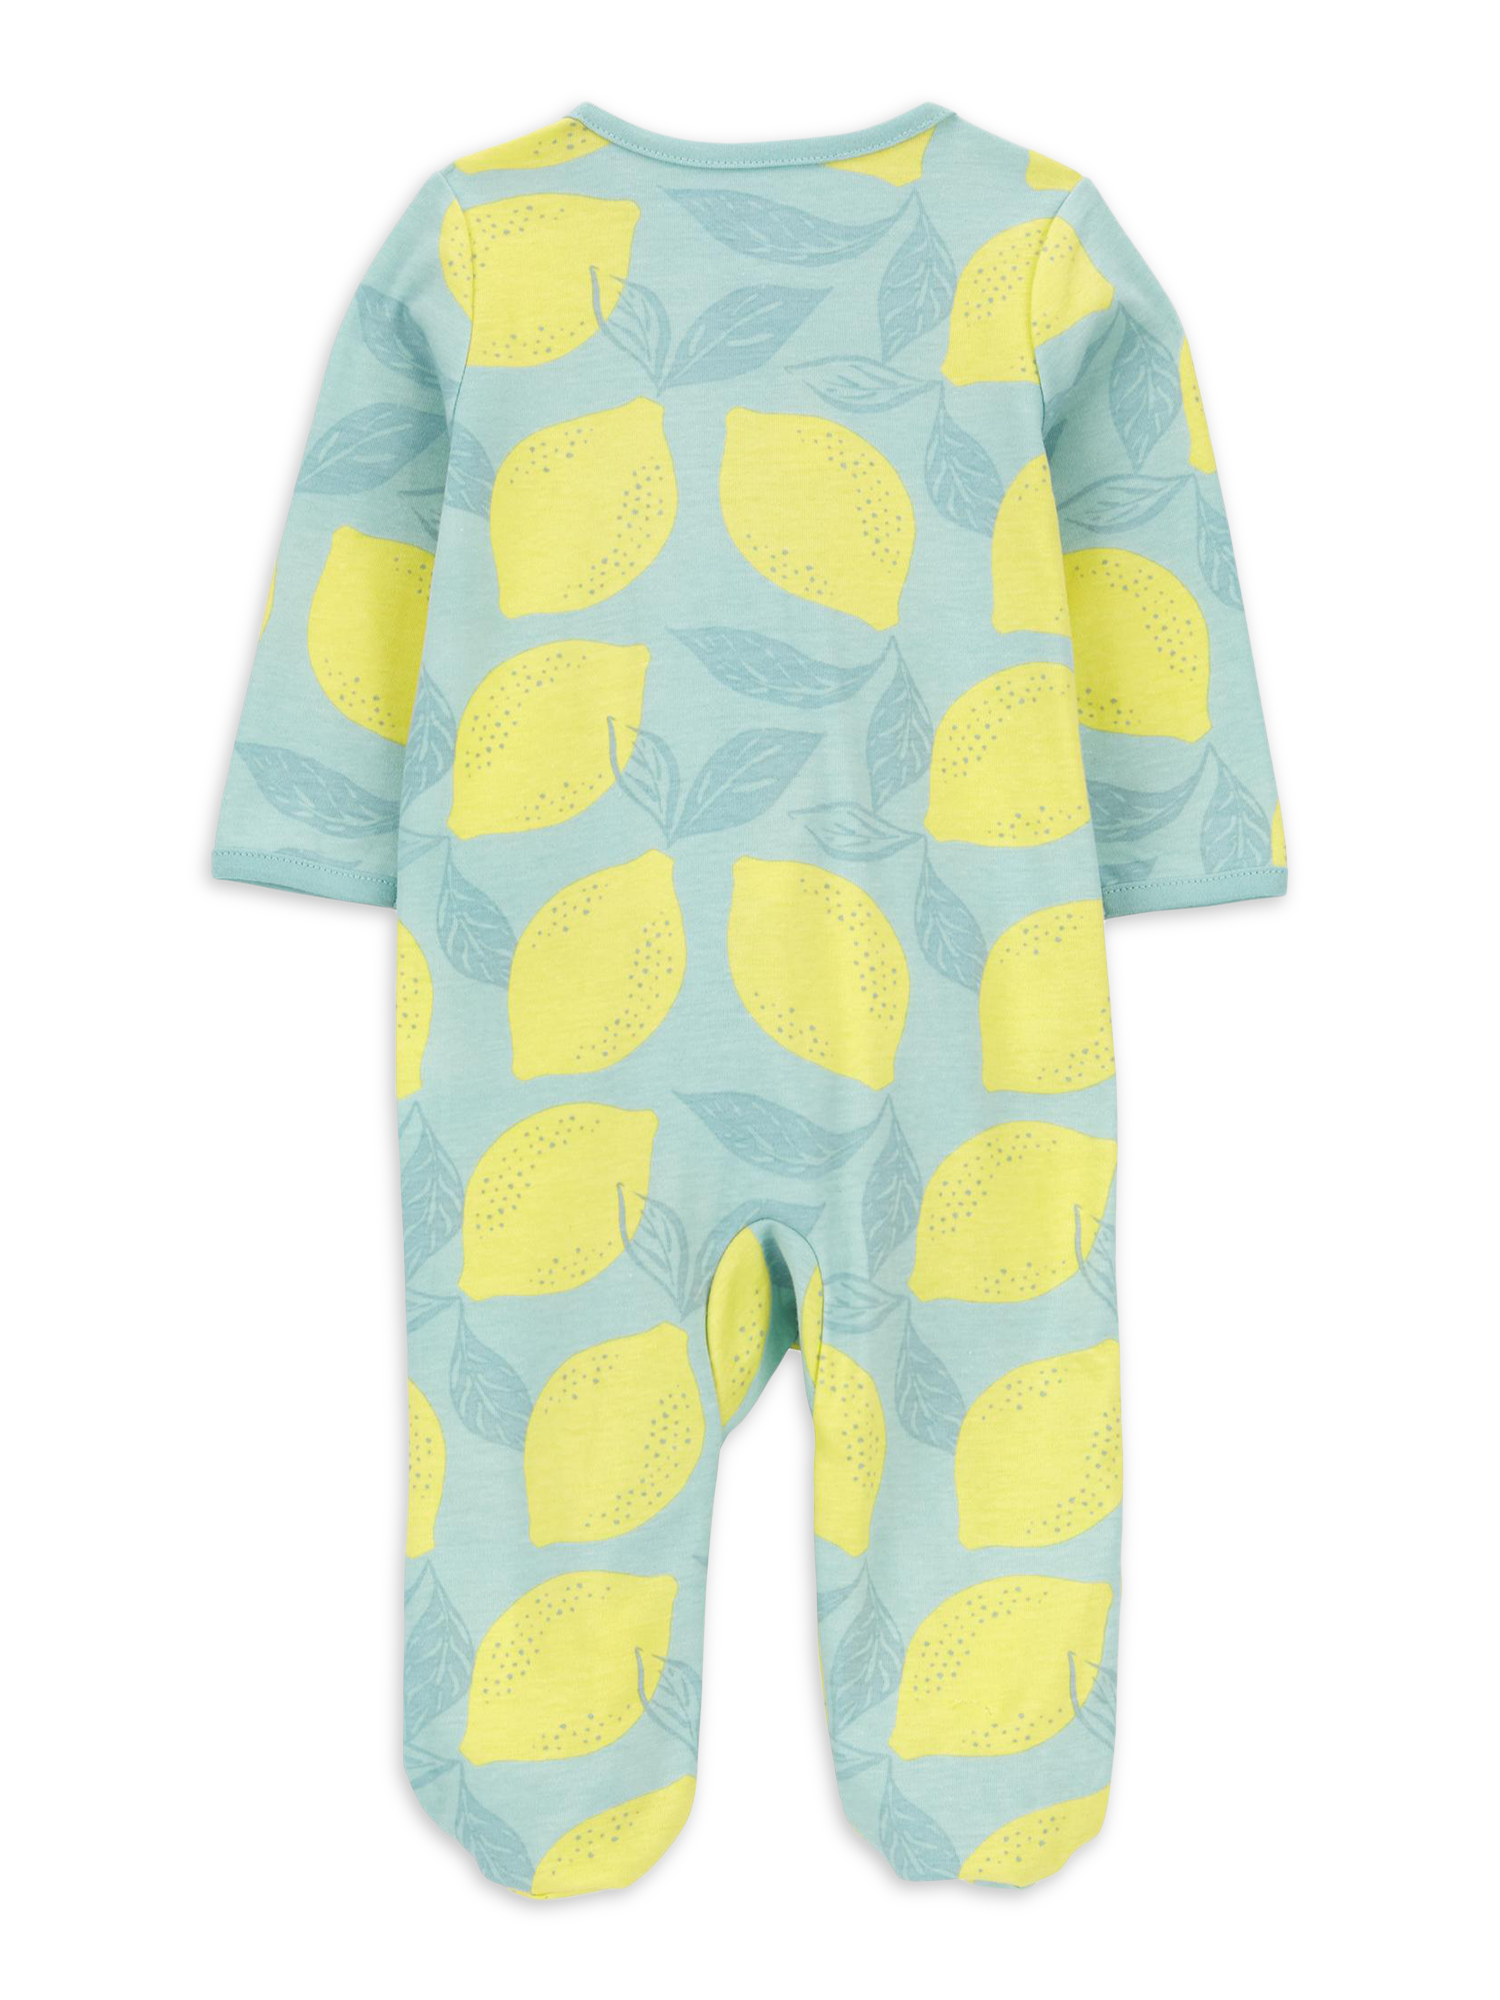 Carter's Child of Mine Baby Girl Sleep N Play, One-Piece, Sizes Preemie-6/9 Months - image 2 of 6